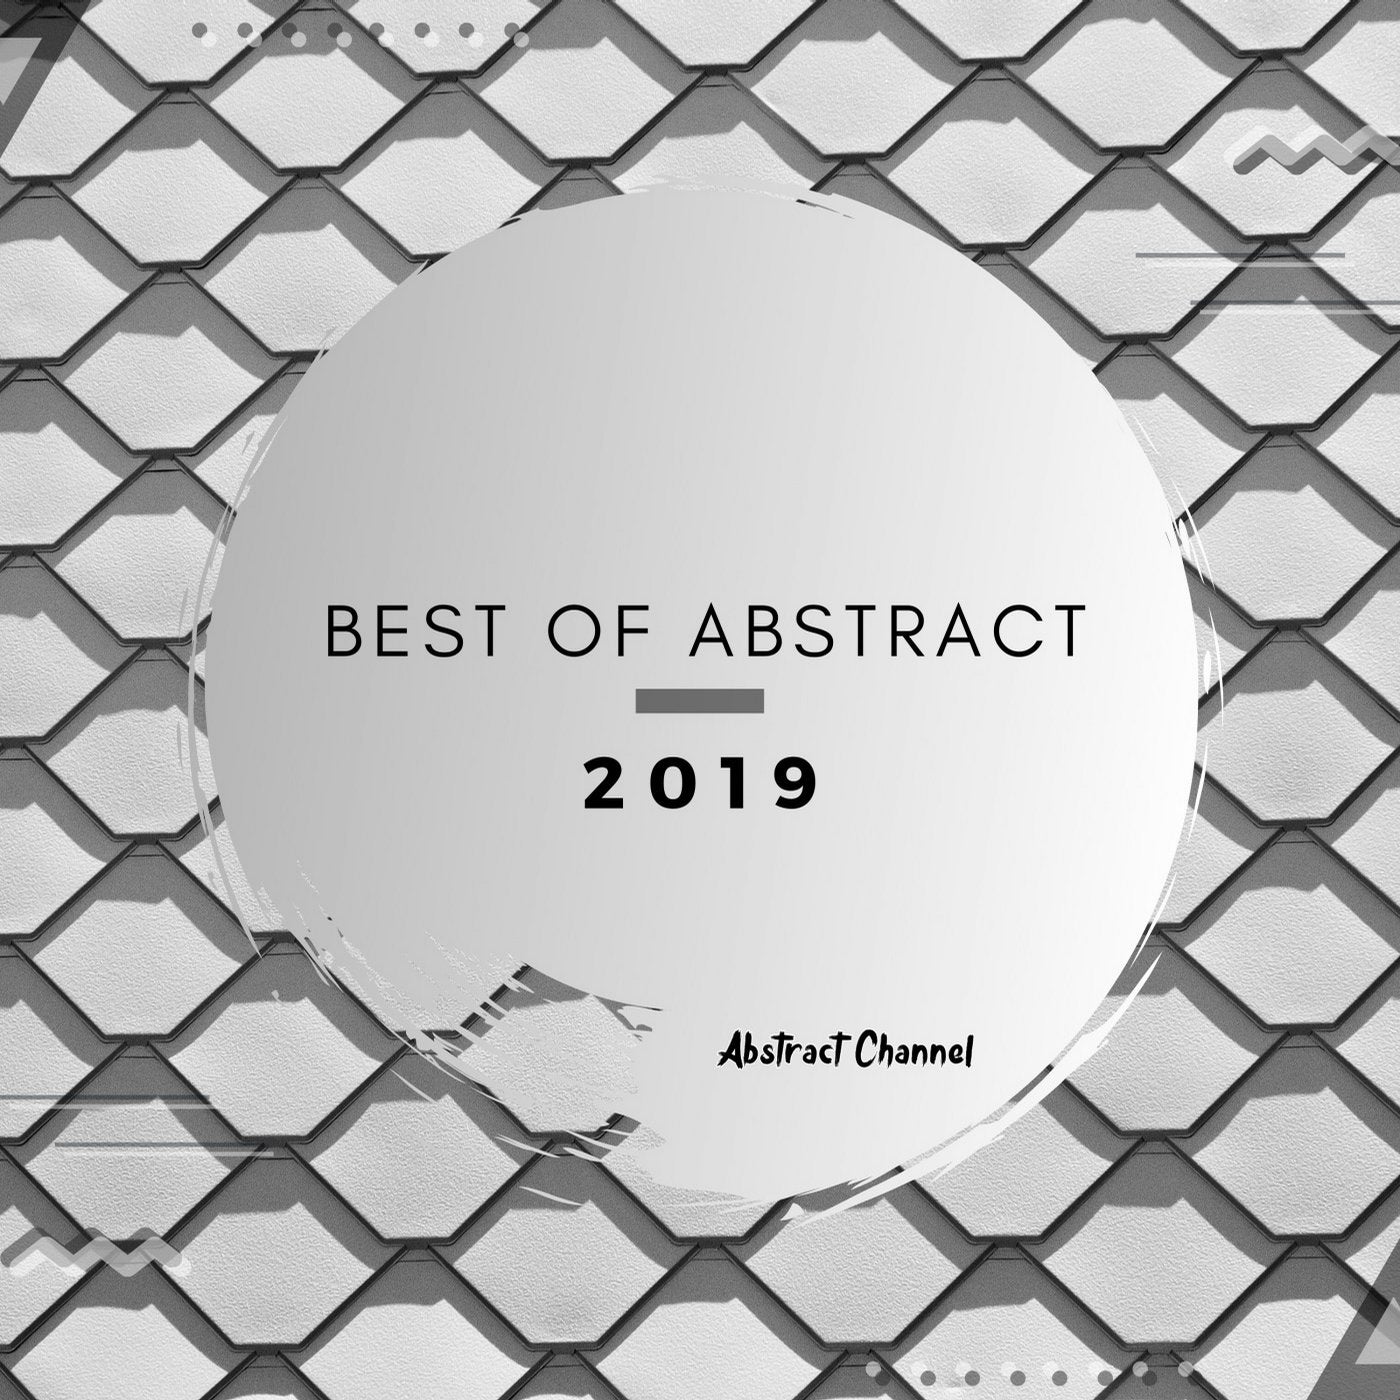 Best of Abstract 2019